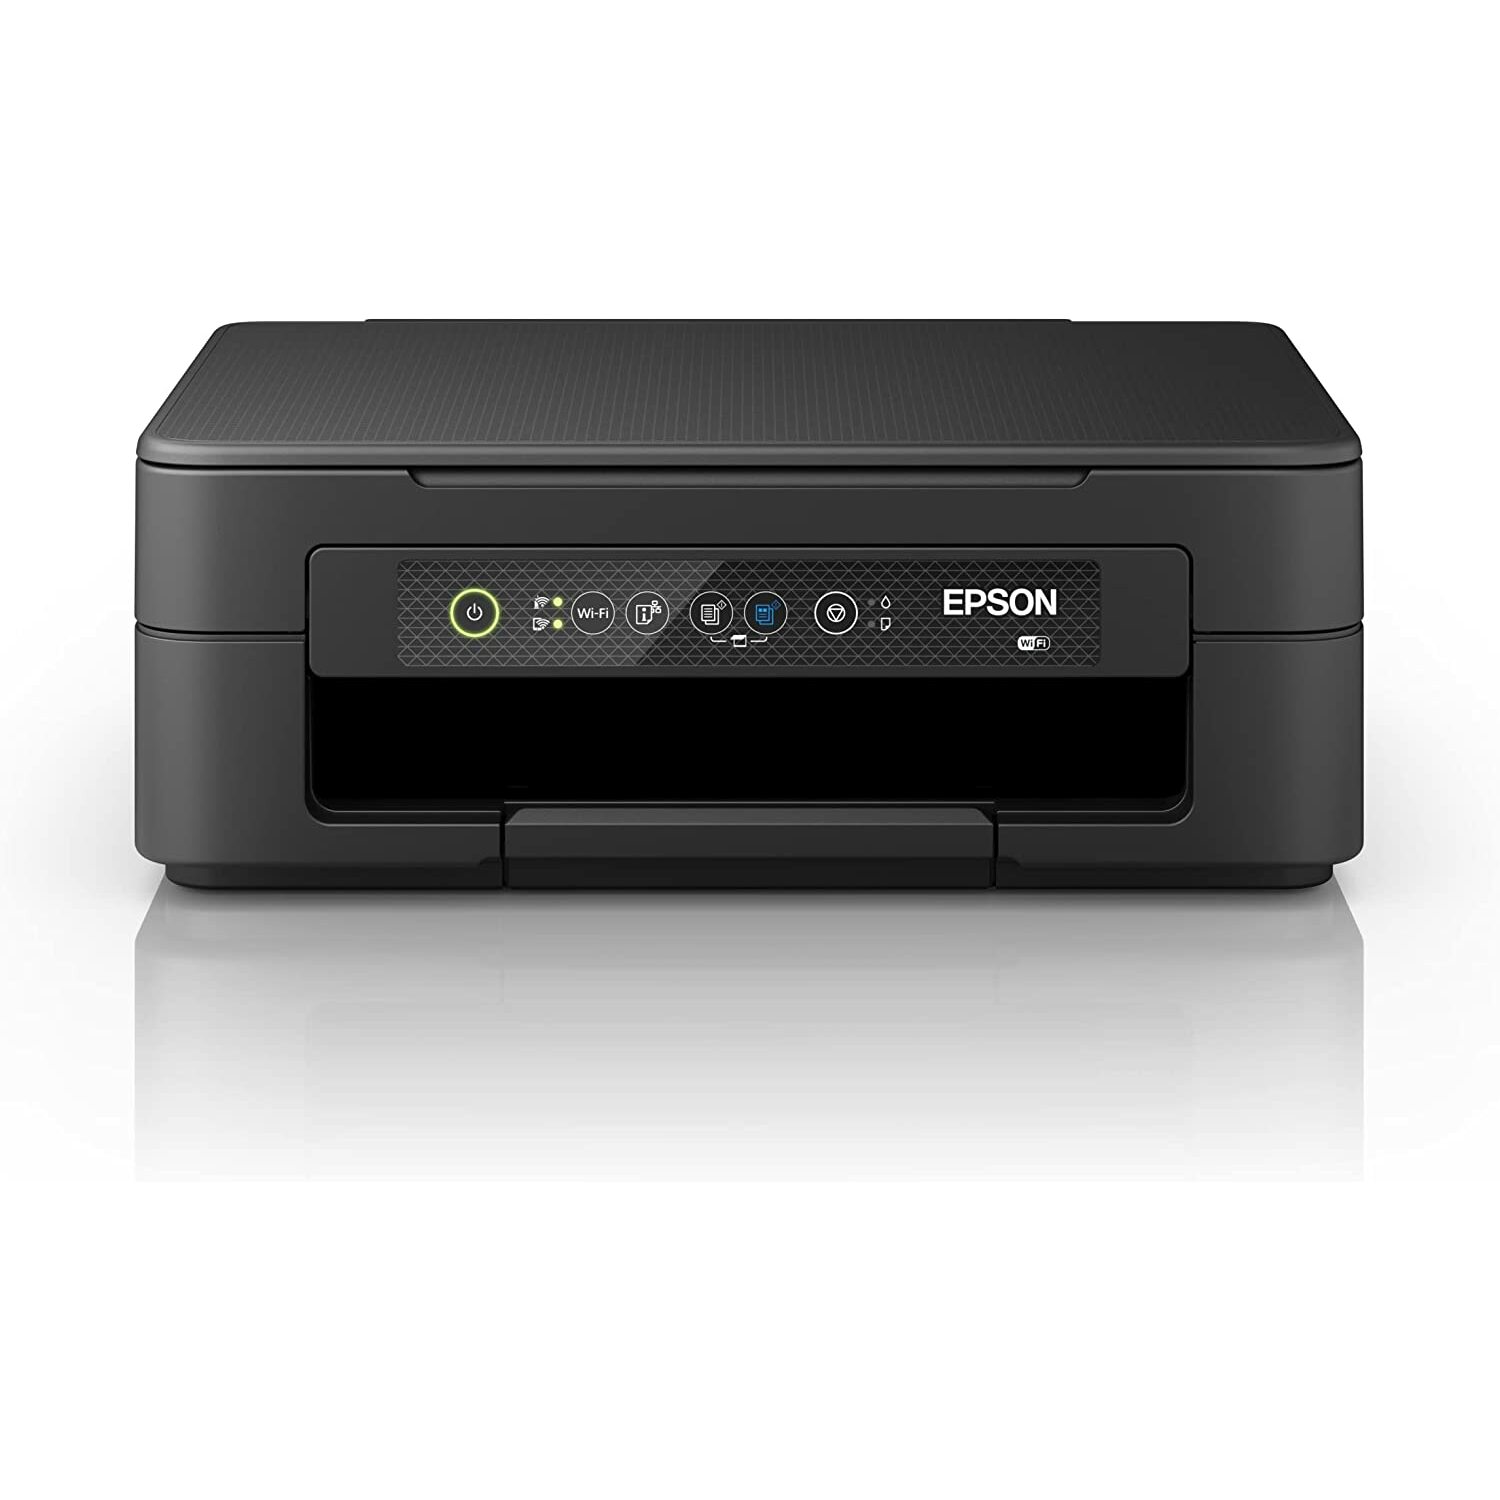 https://www.falconcomputers.co.uk/media/products/96705/0/0/epson-expression-home-xp-2200-a4-printer.jpg.jpg